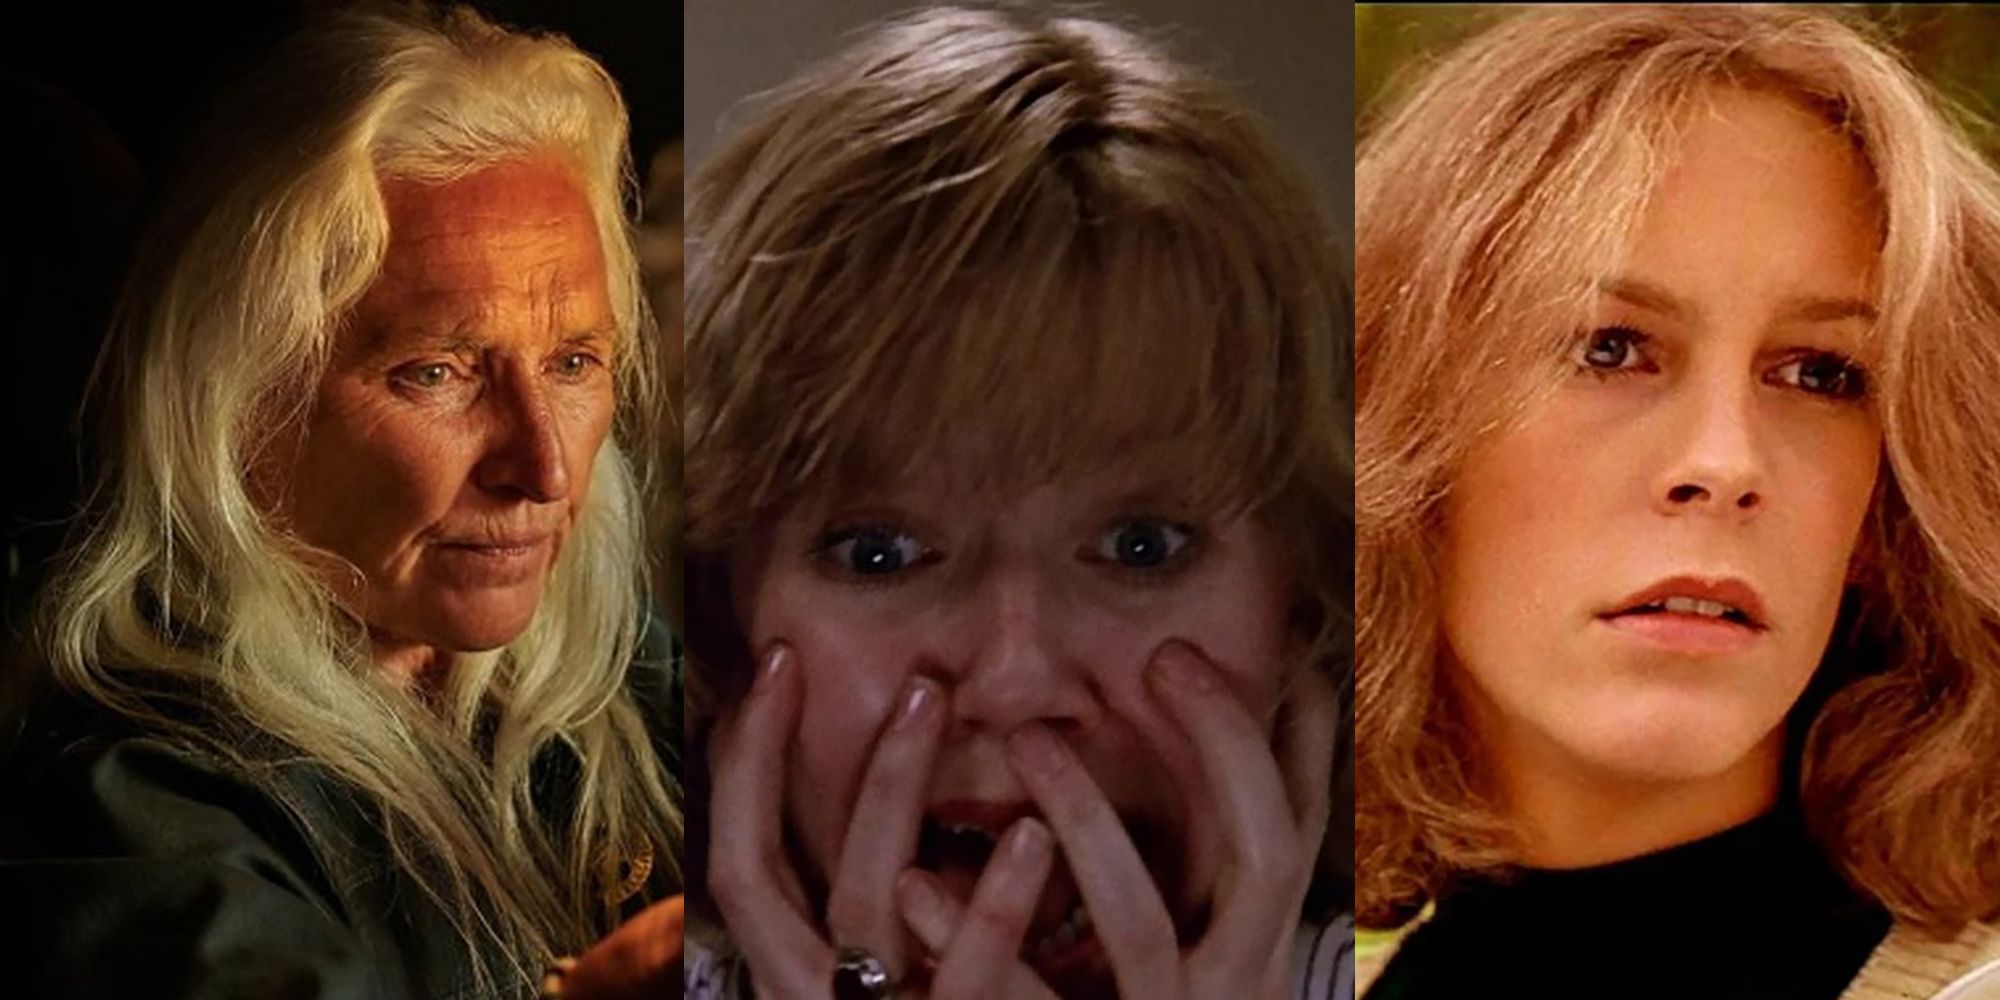 Laurie Strode In Halloween, Sally Hardesty in Texas Chainsaw Massacre and Alice Hardy in Friday The 13th Part 2